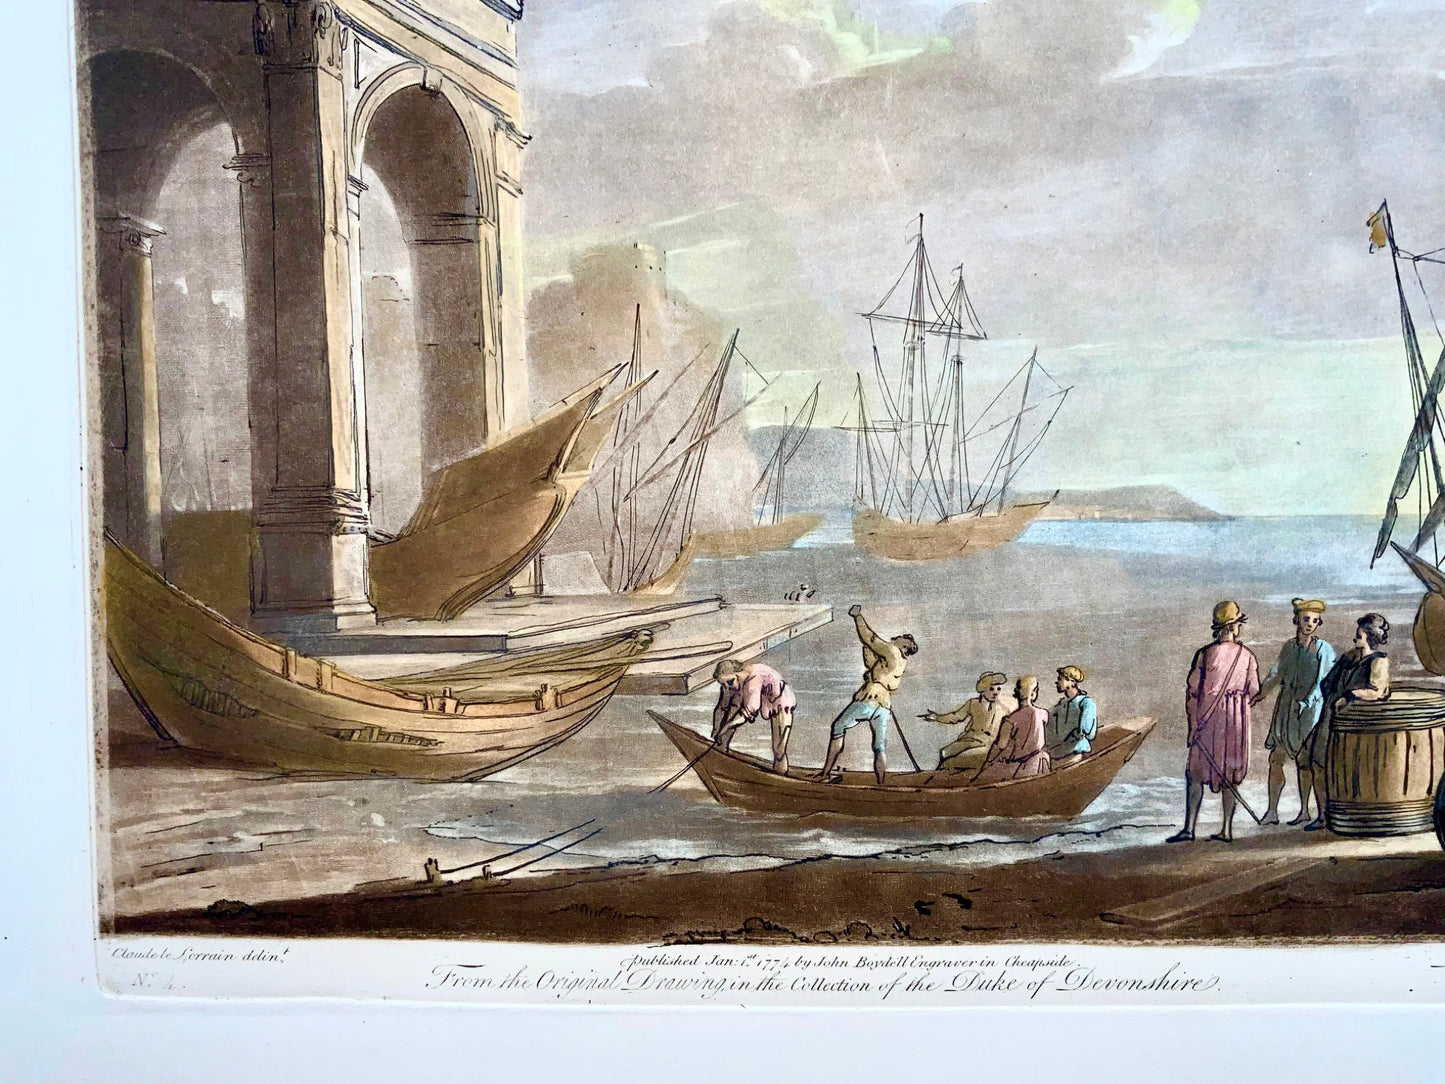 1774 Richard Earlom after CLAUDE LORRAIN - Harbour view with Ships - Large paper - Classical art